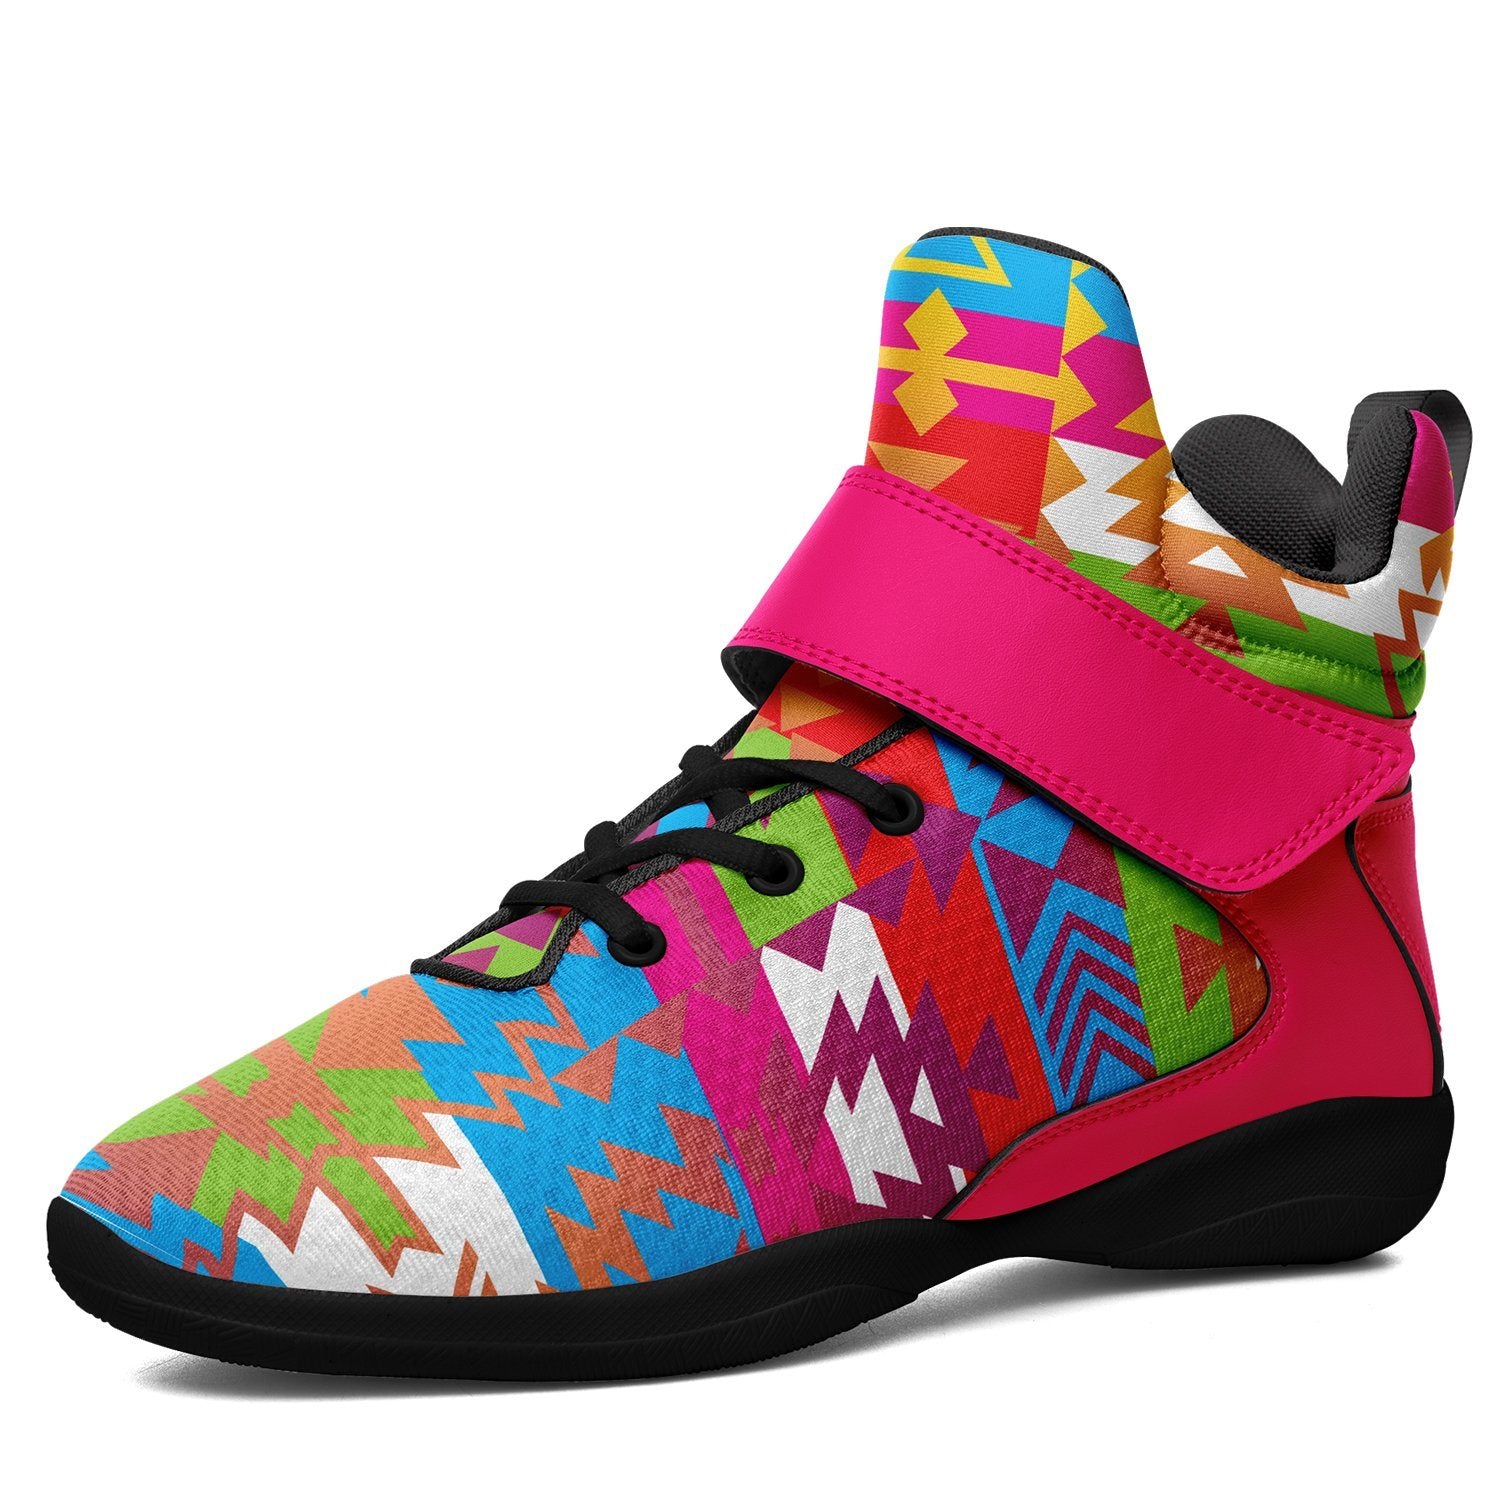 Grand Entry Ipottaa Basketball / Sport High Top Shoes 49 Dzine US Women 4.5 / US Youth 3.5 / EUR 35 Black Sole with Pink Strap 